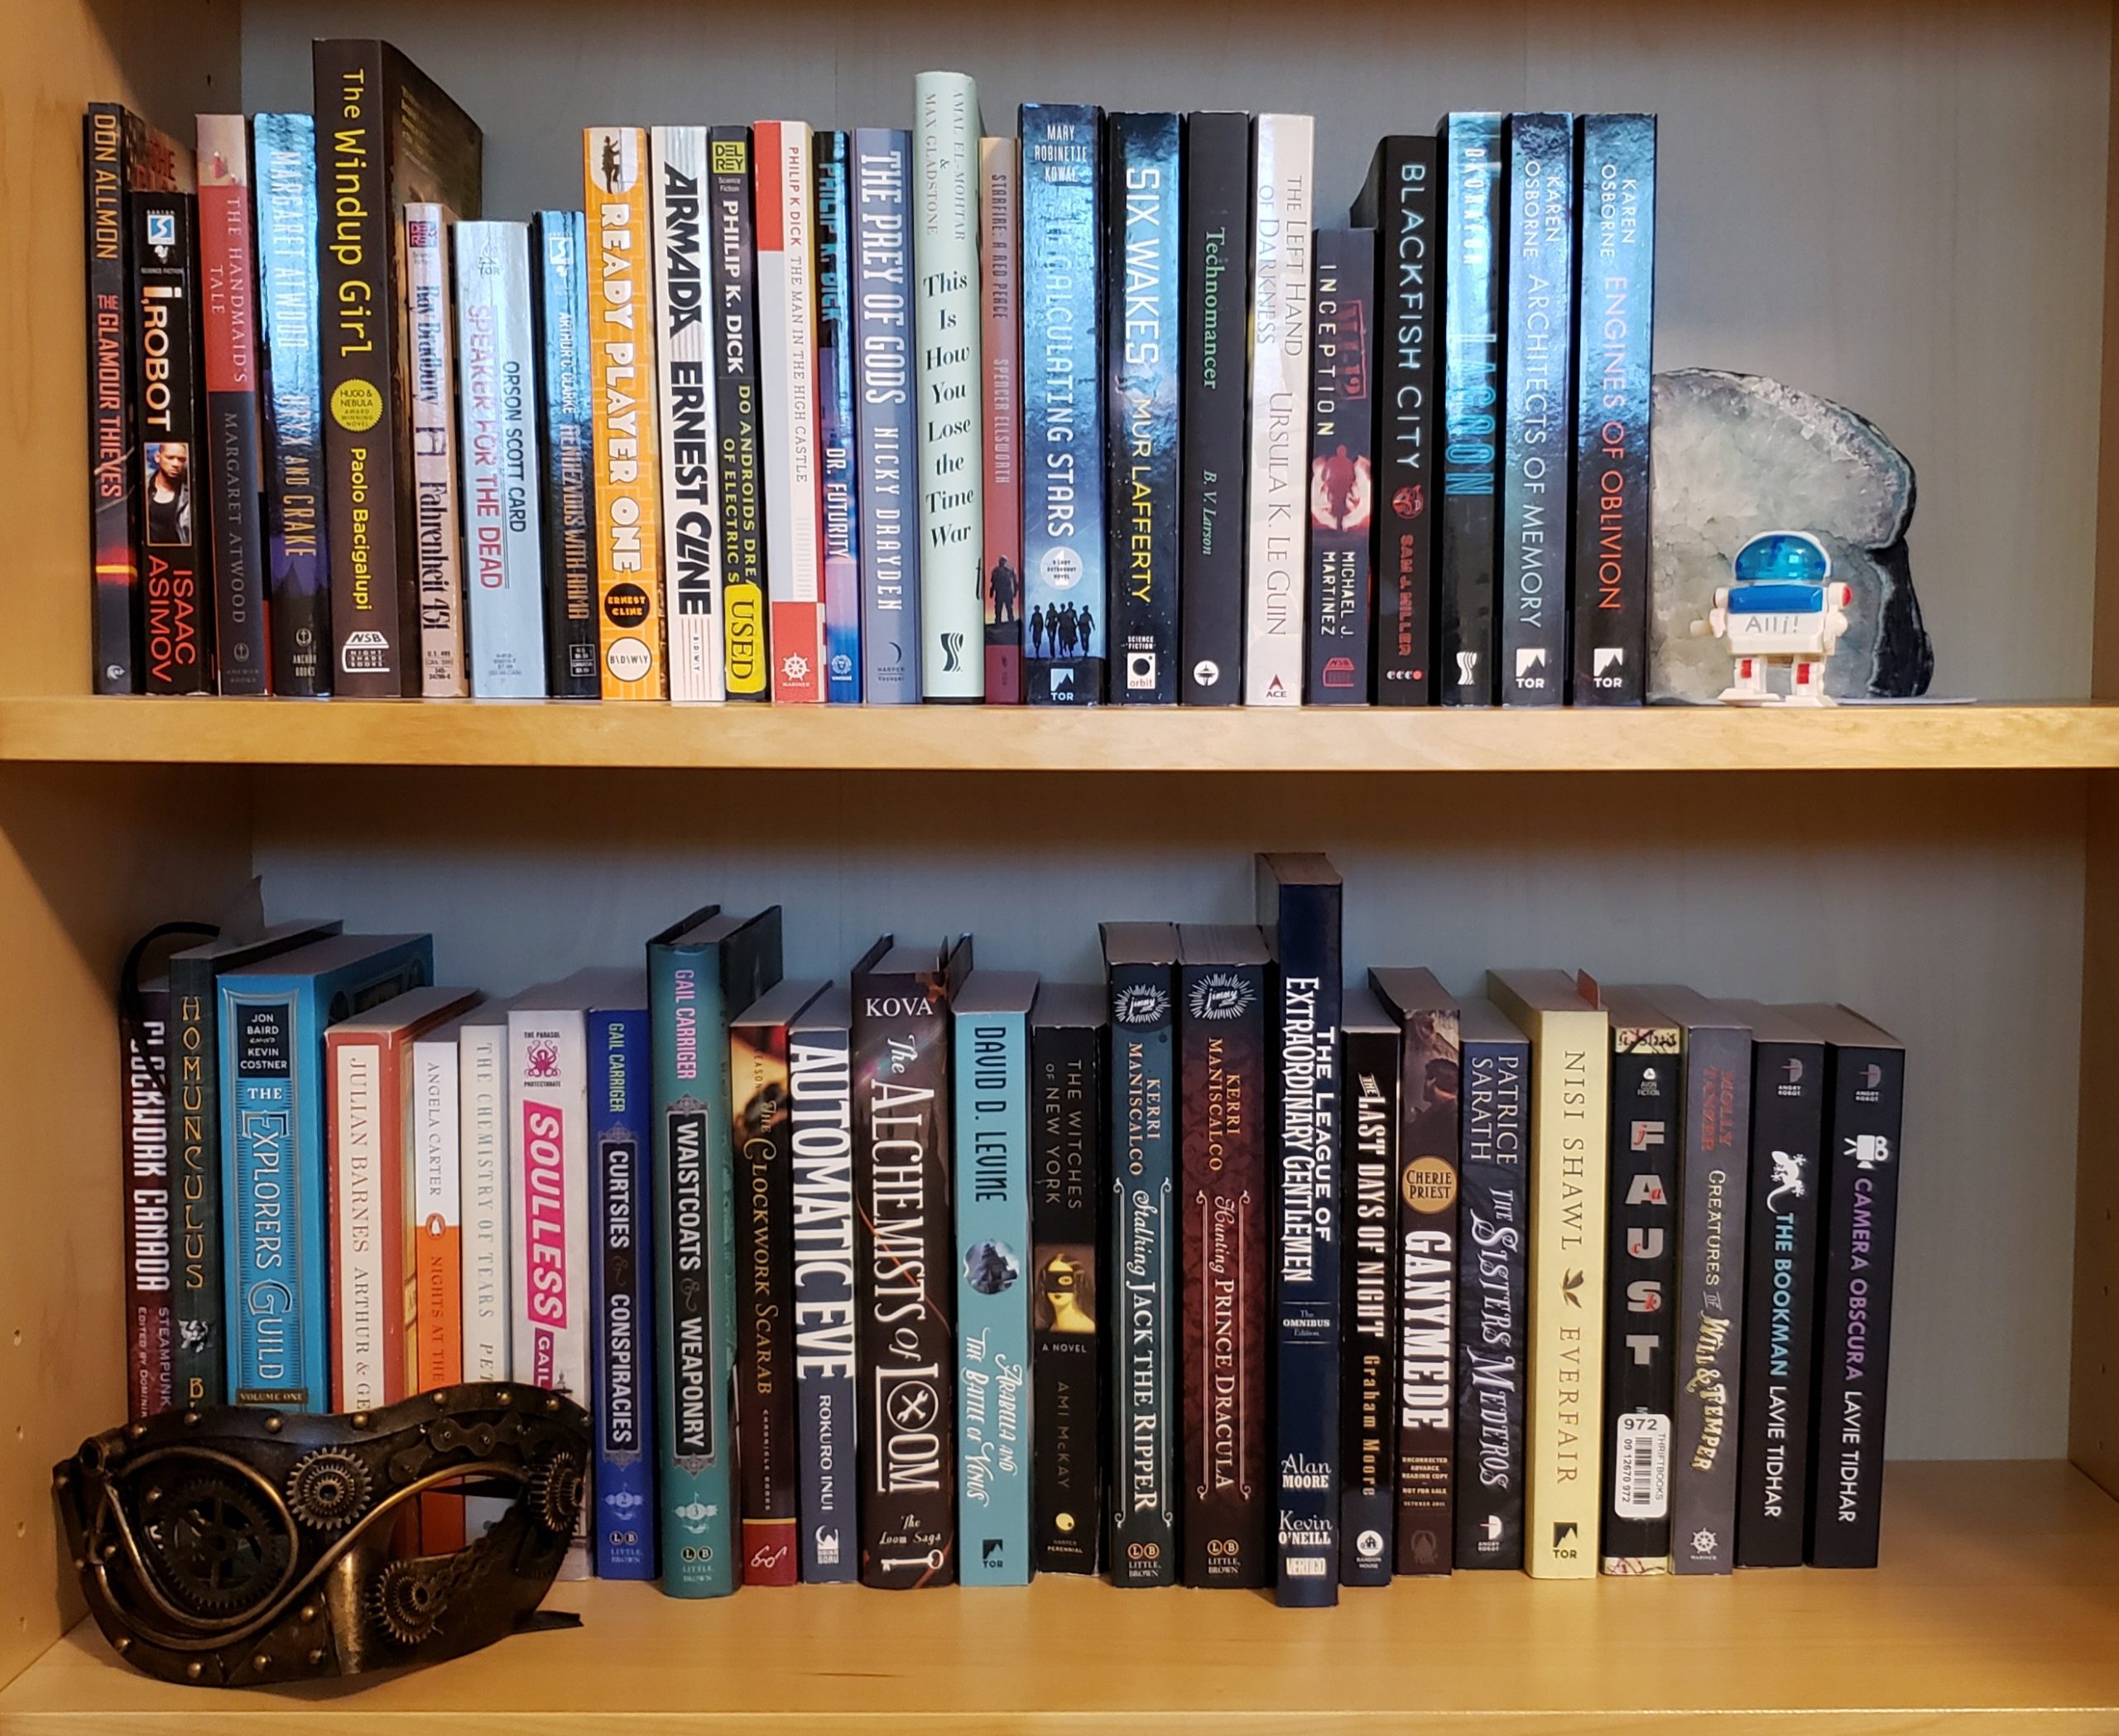 Two shelves of books divided by science fiction and steampunk